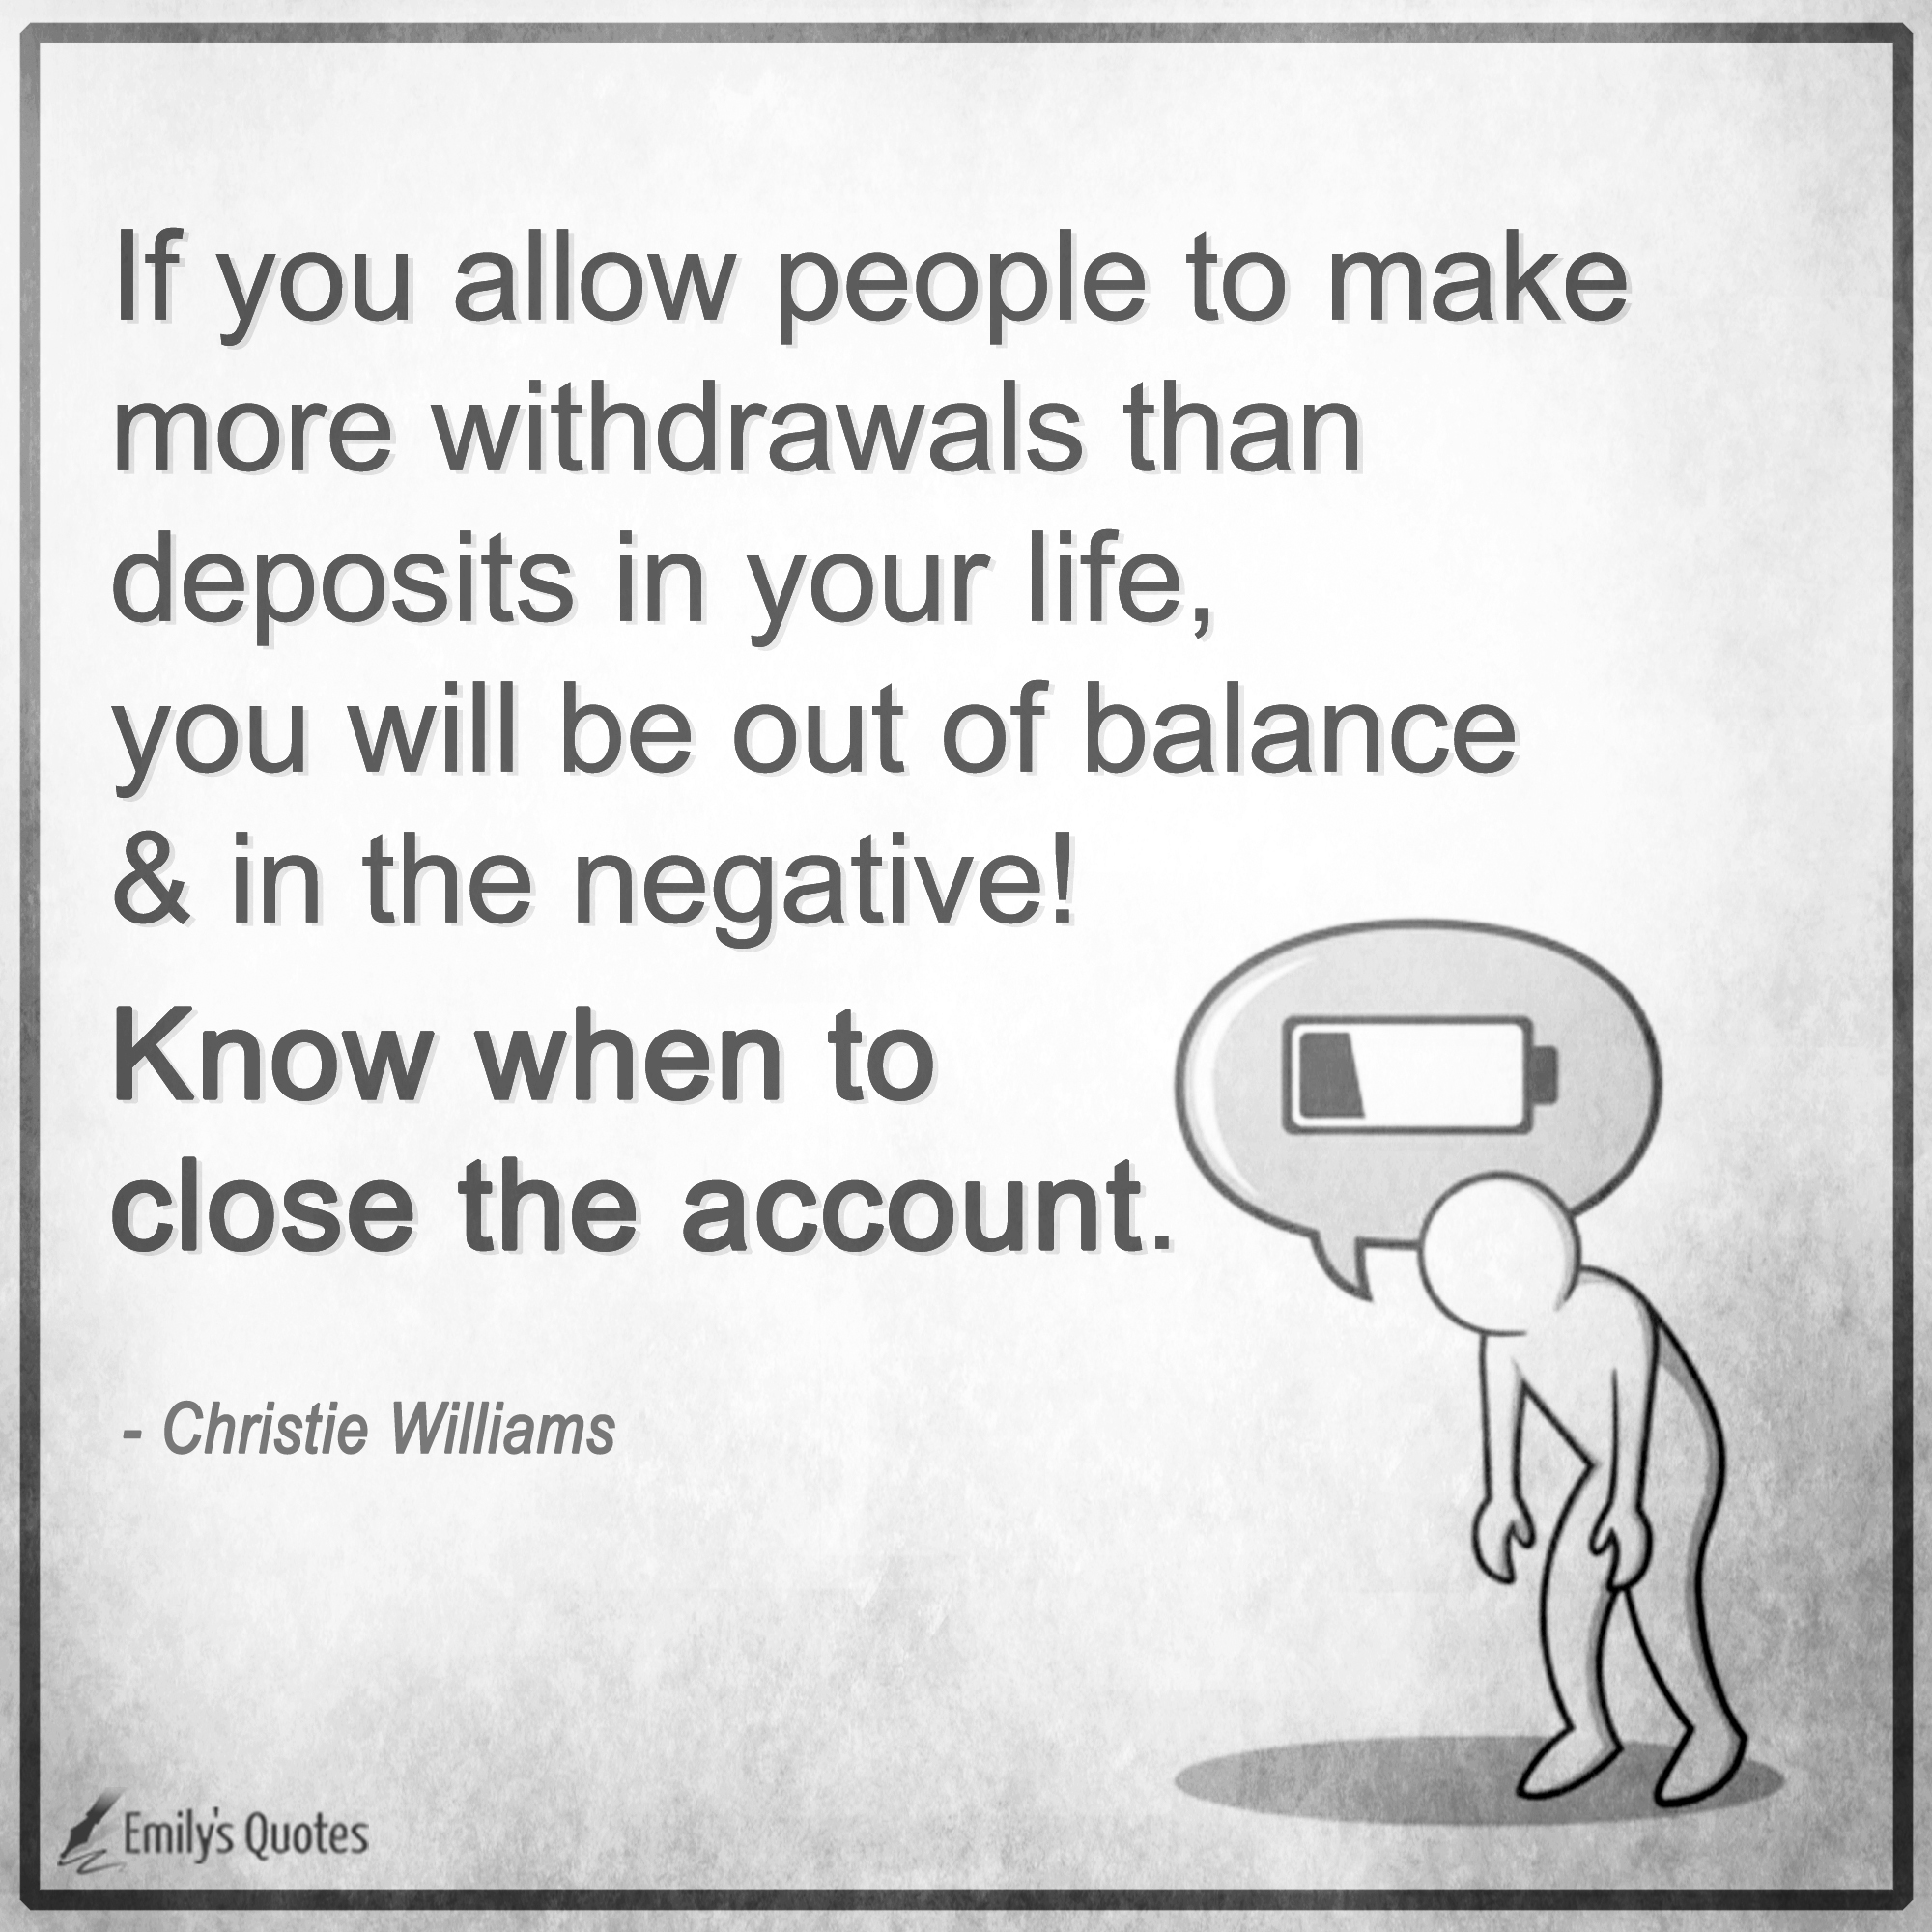 If you allow people to make more withdrawals than deposits in your life, you will be out